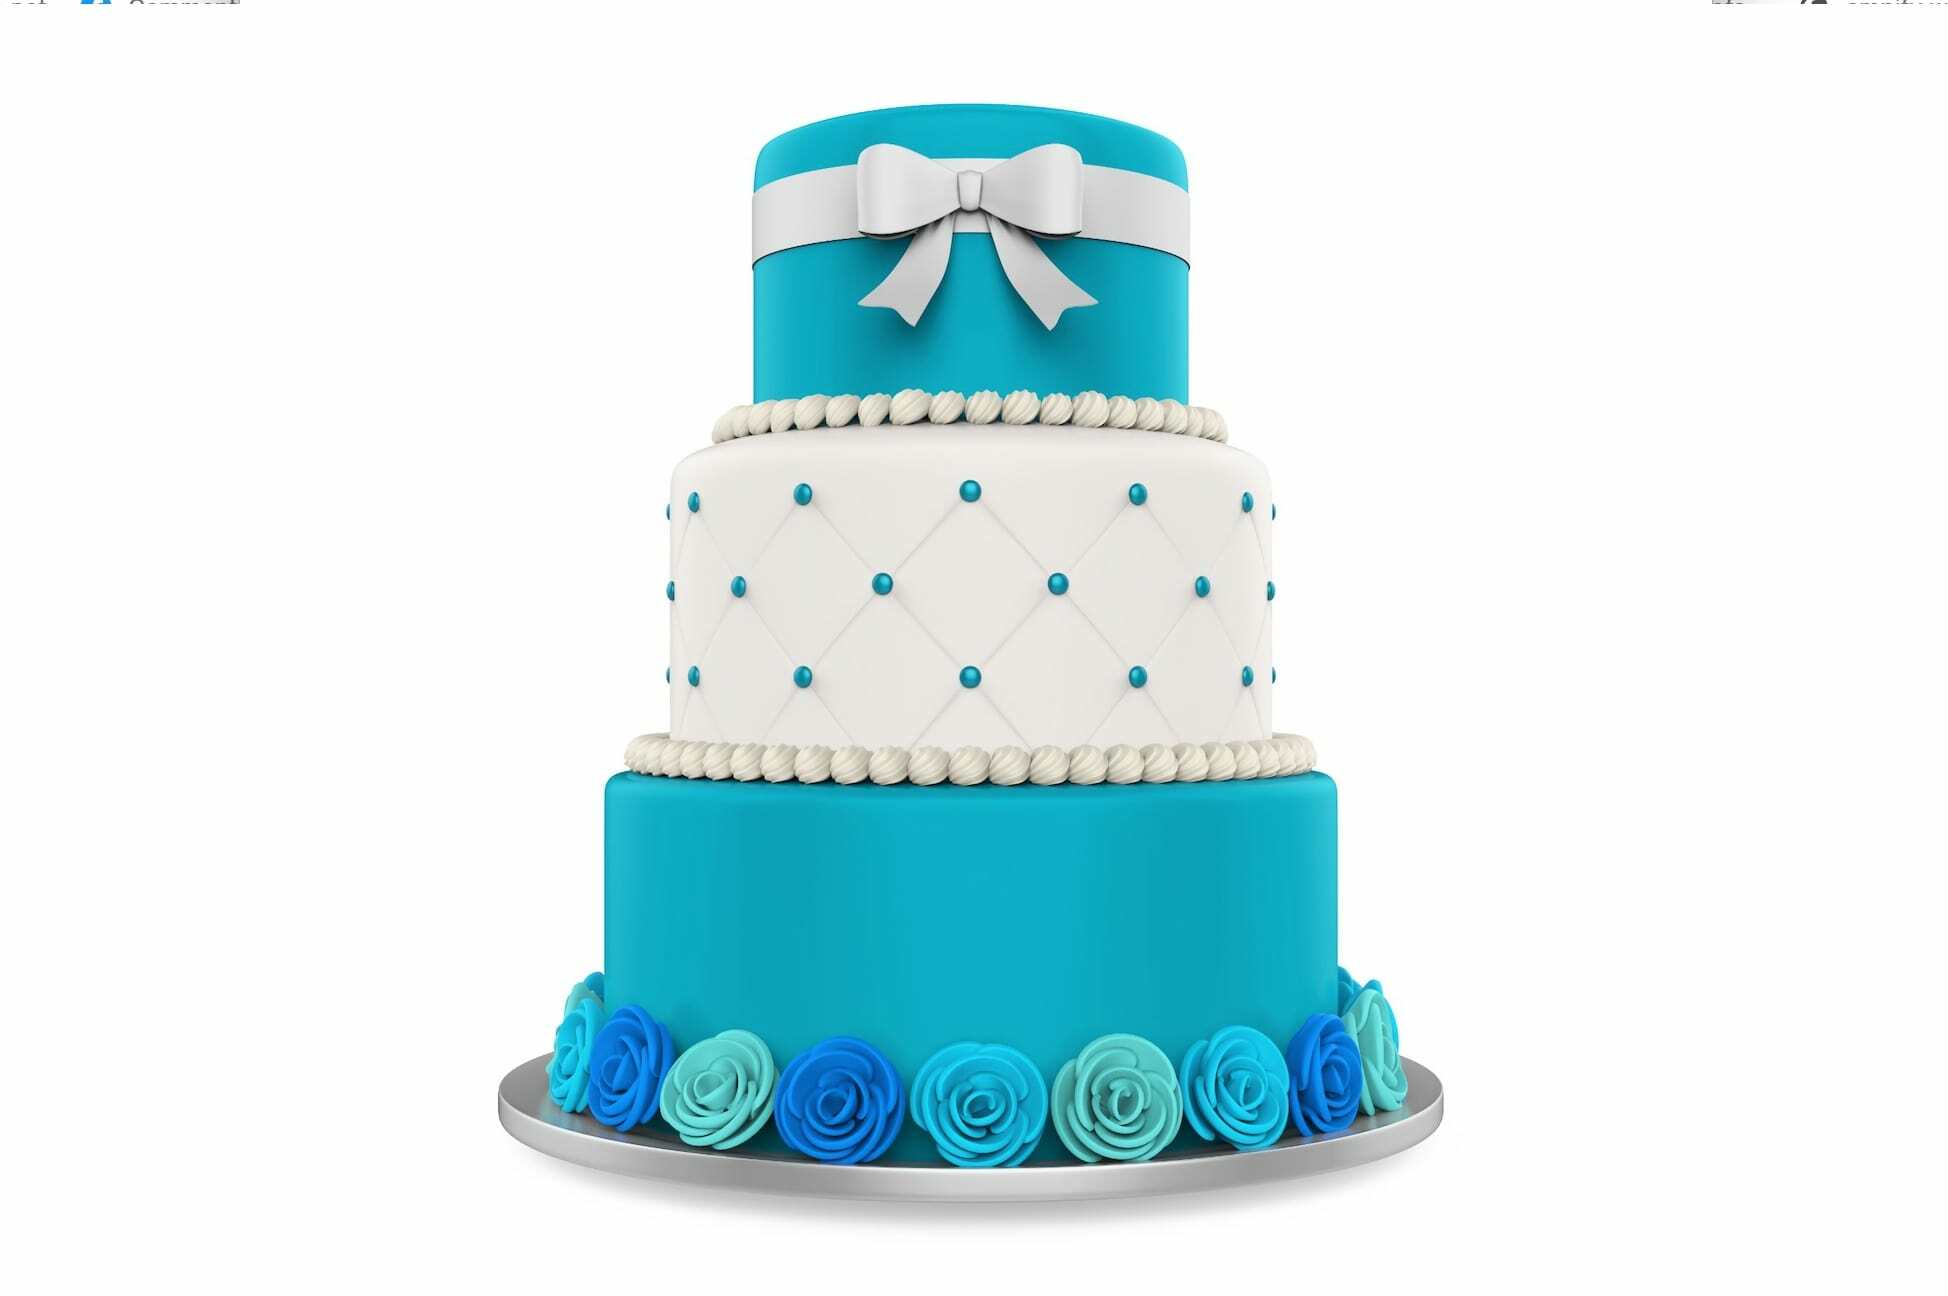 Win Cake Sweepstakes Contests giveaways min